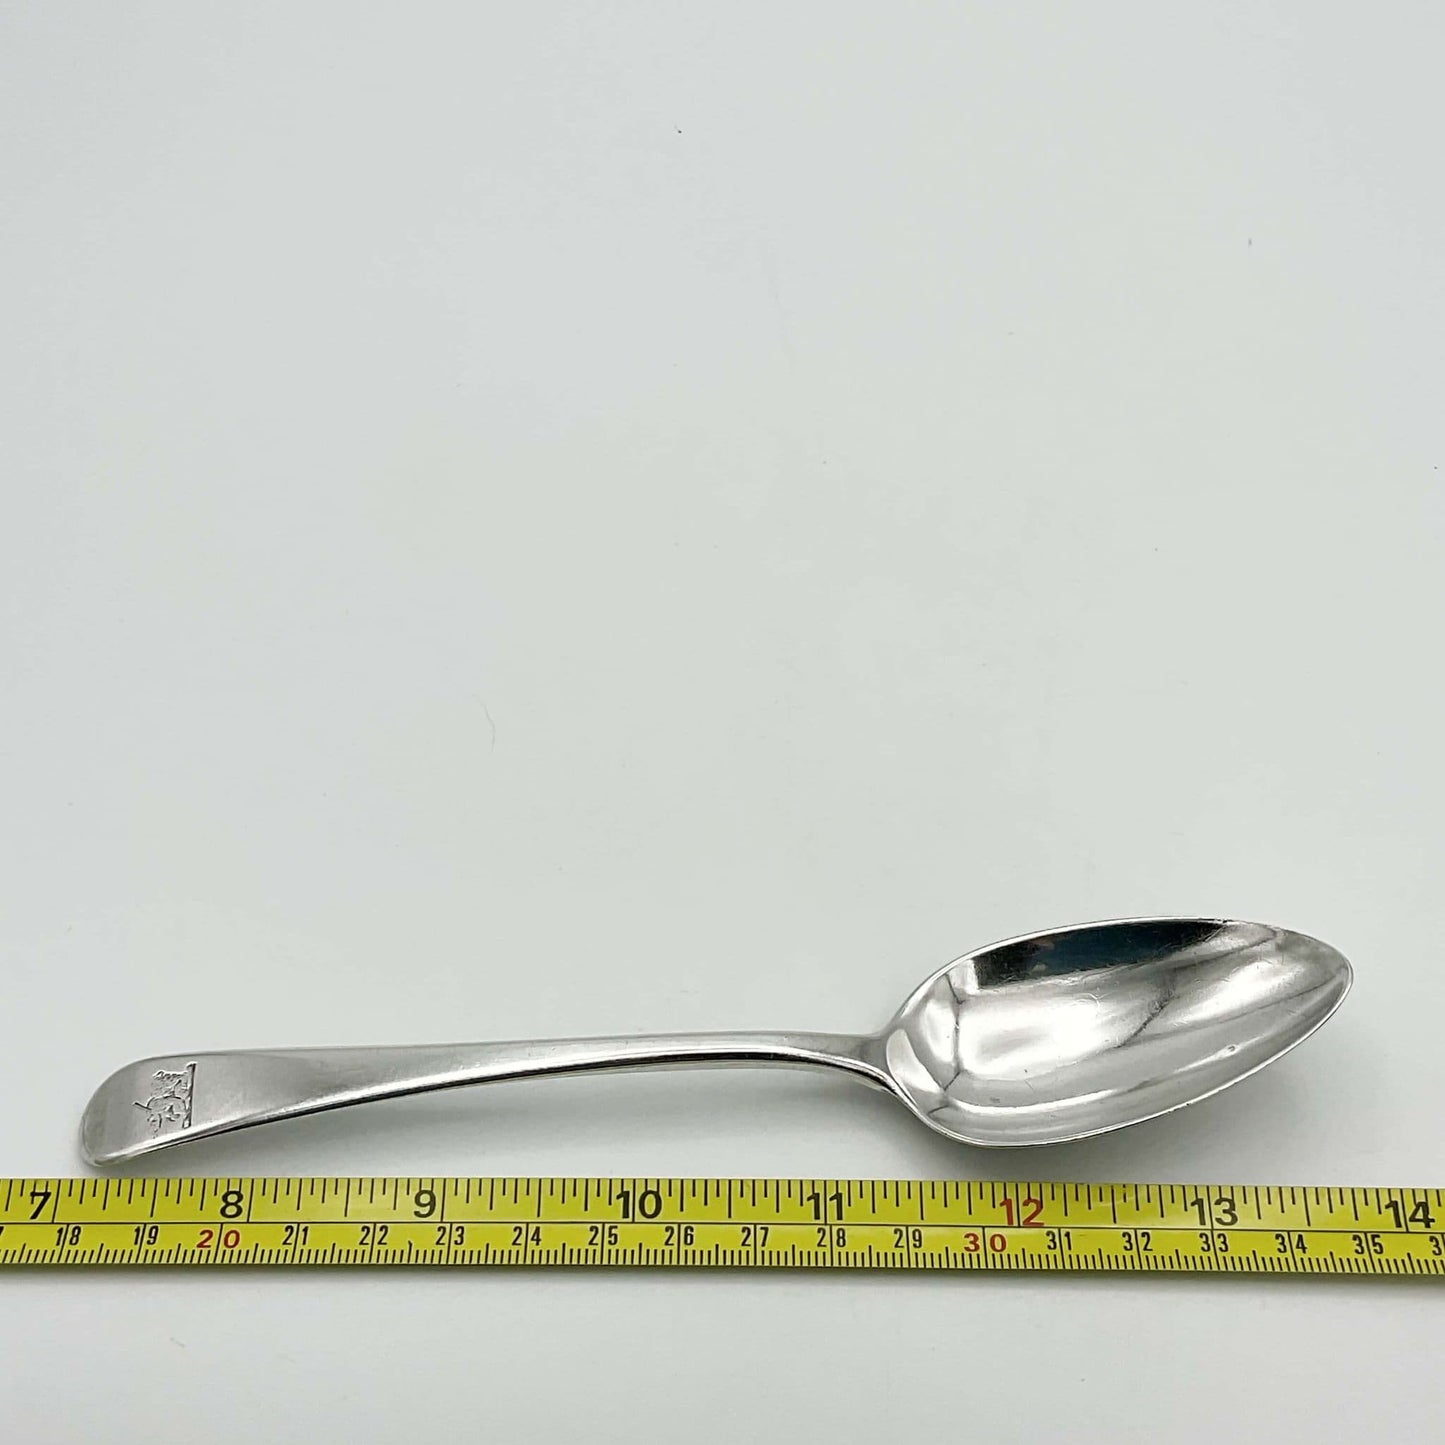 antique silver dessert spoon next to tape measure showing length as 17cm